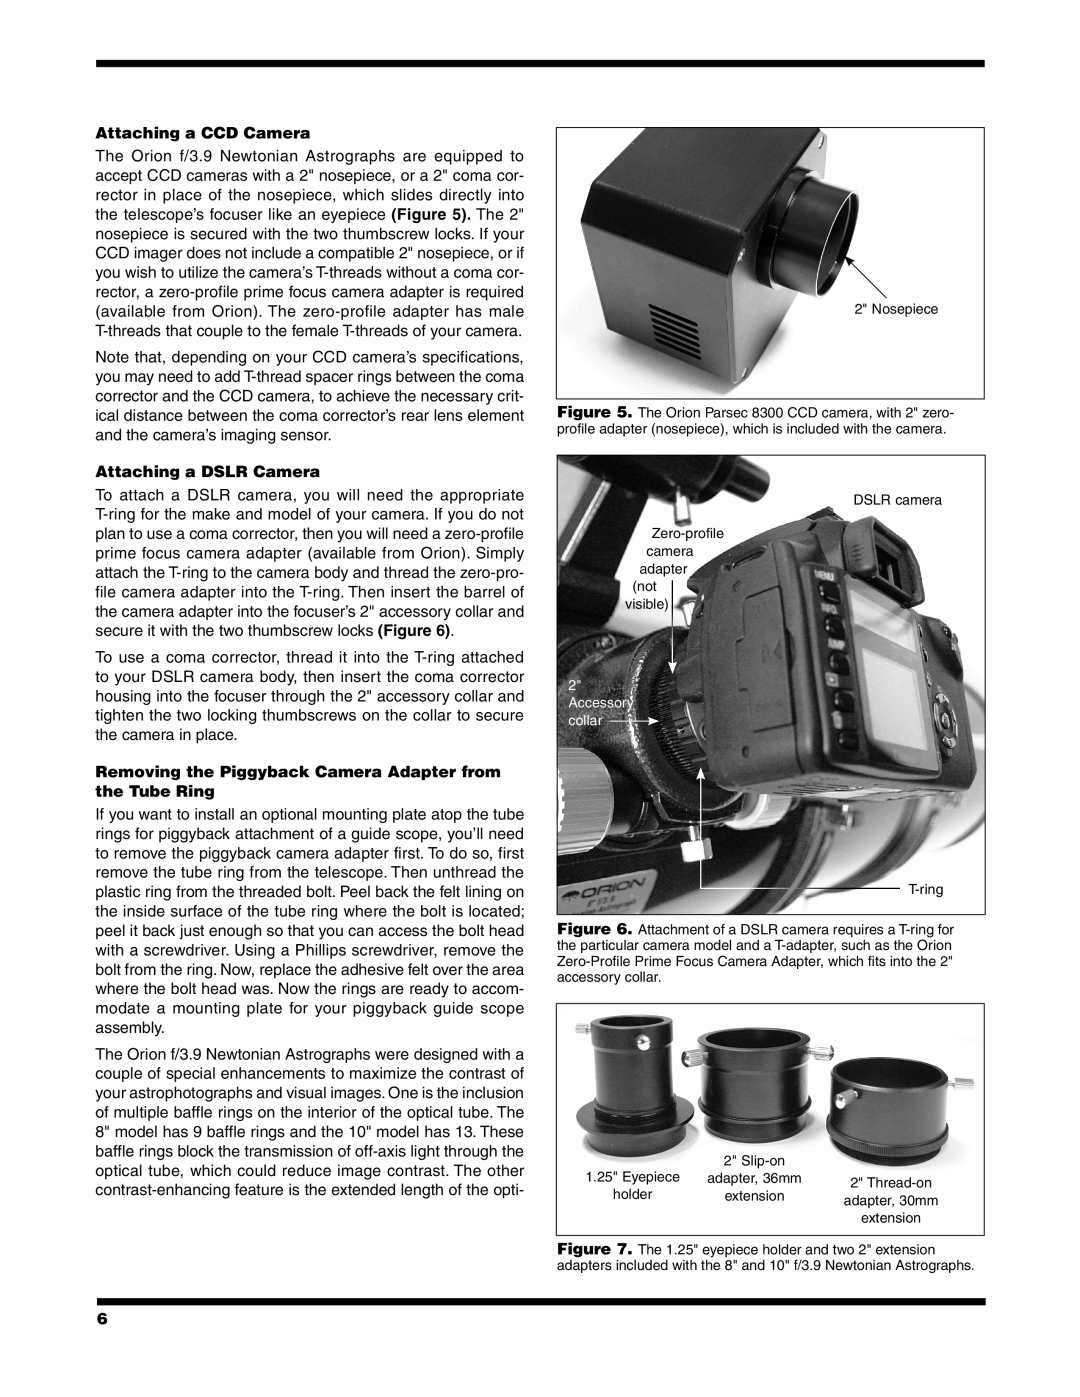 Orion #8297 8" F/3.9, #8296 10" F/3.9 instruction manual Attaching a CCD Camera, Attaching a DSLR Camera 